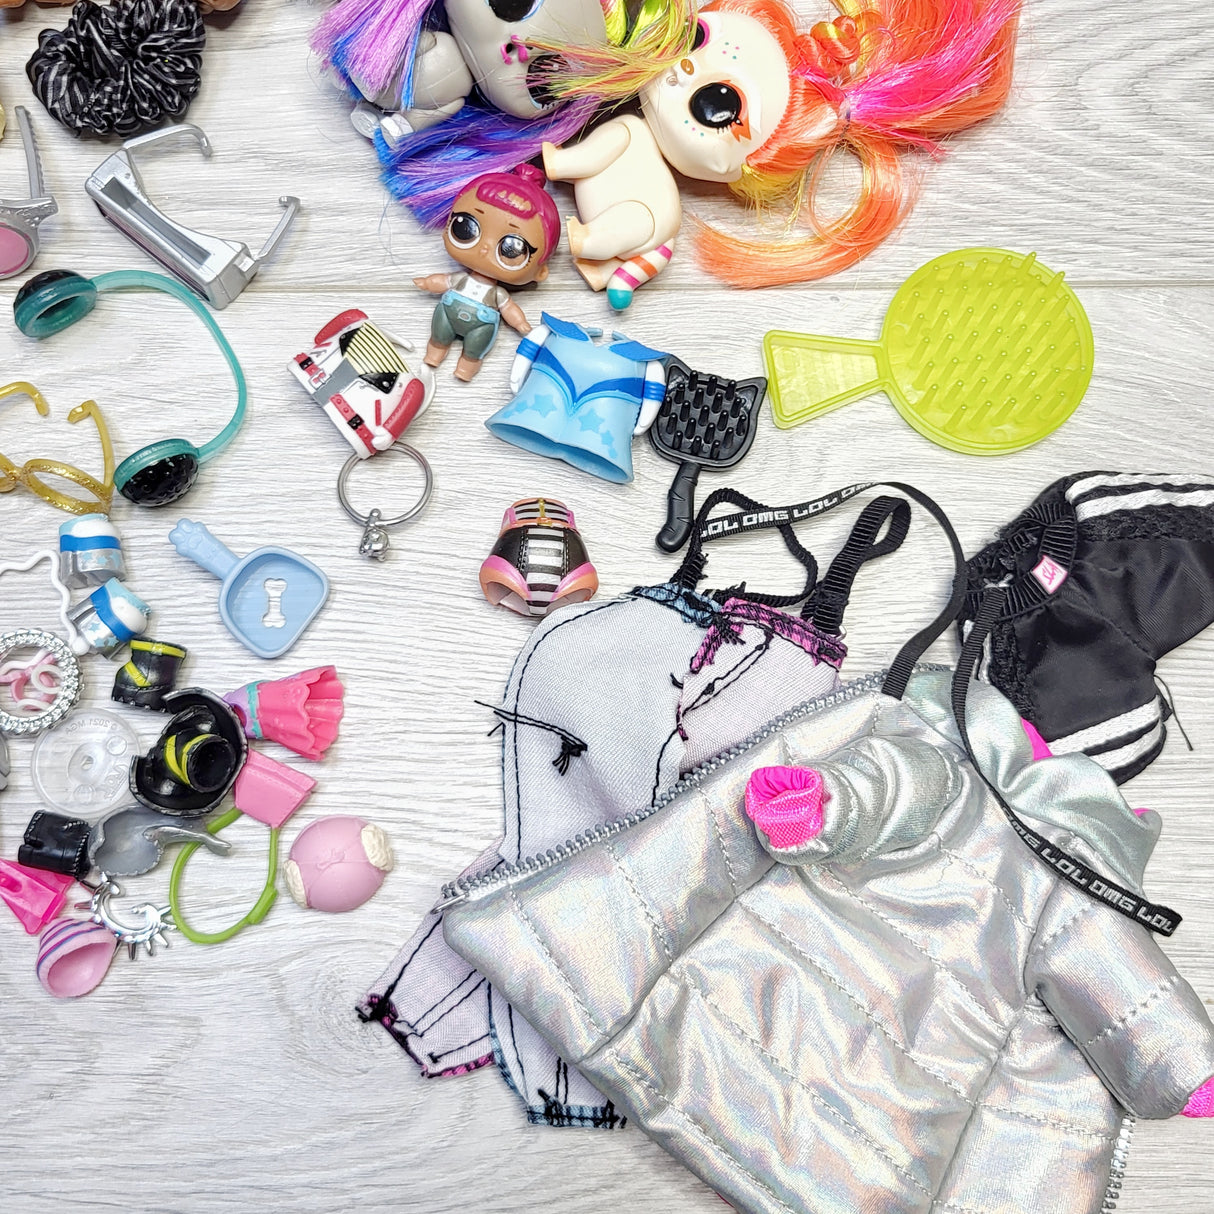 CHAM2 - LOL + OMG Surprise doll and accessory lot